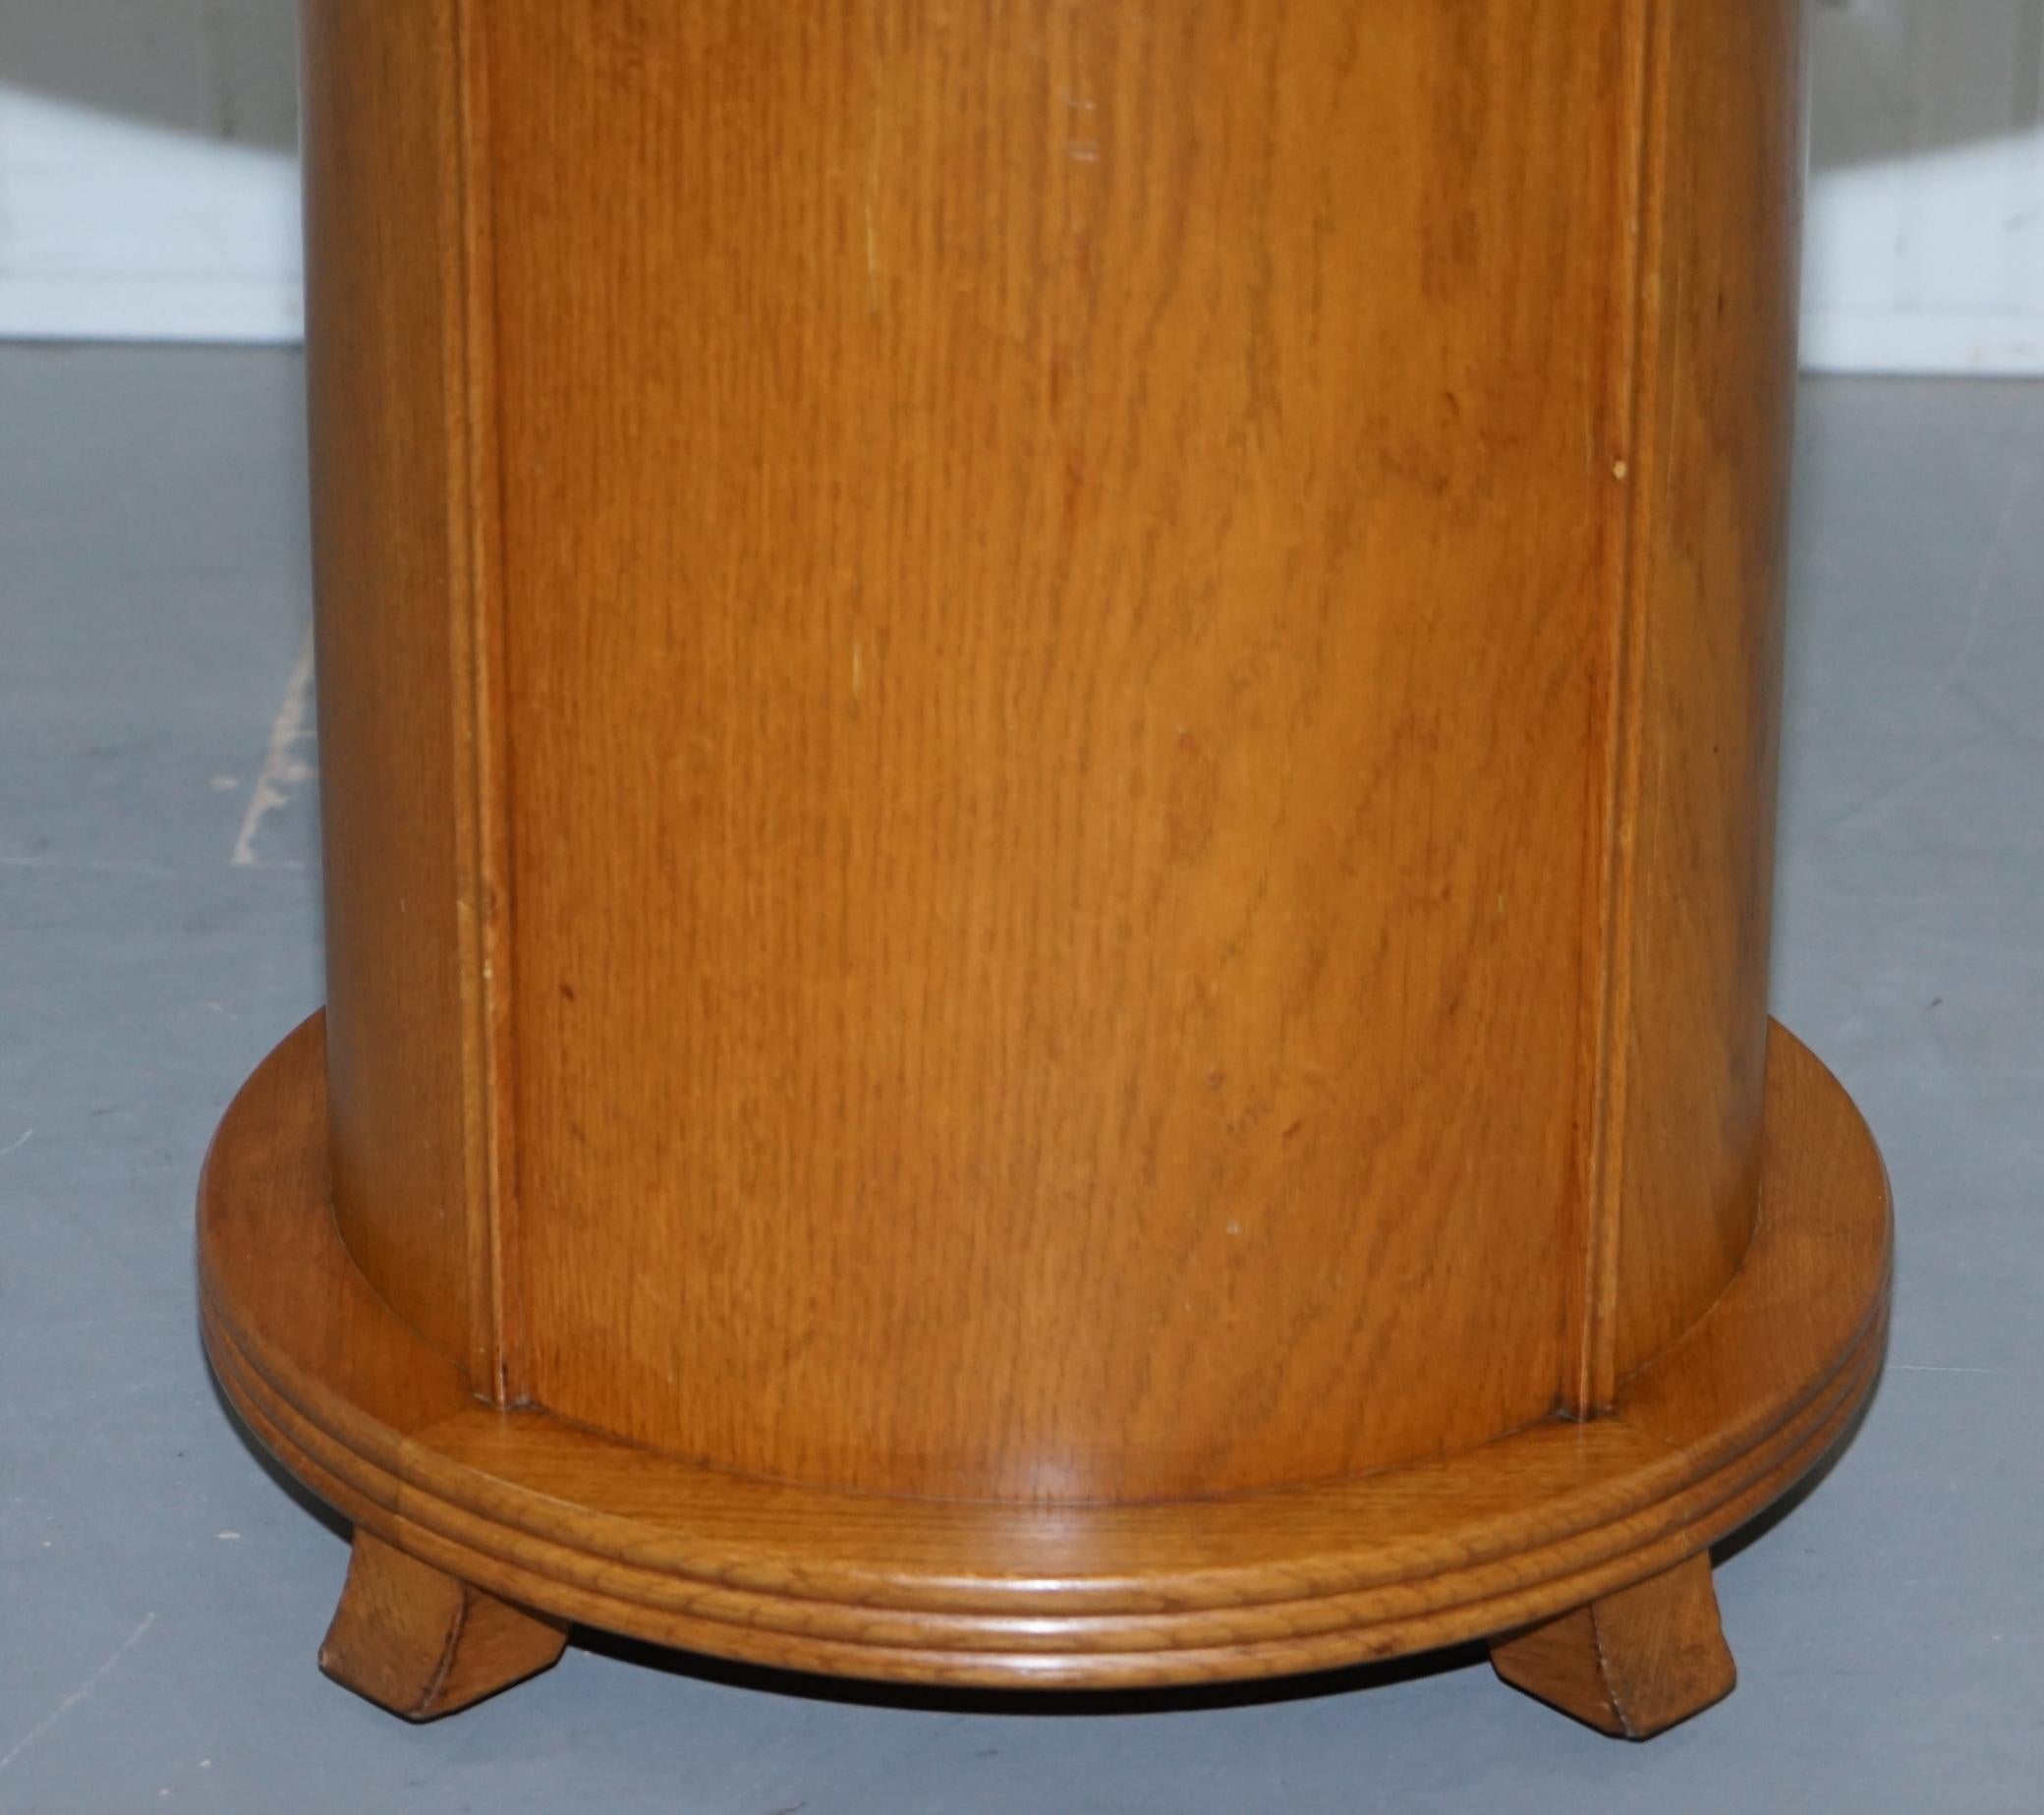 Hand-Crafted Rare 1930s Walnut Cocktail Table Cabinet with Rising Drinks Decanter Holder